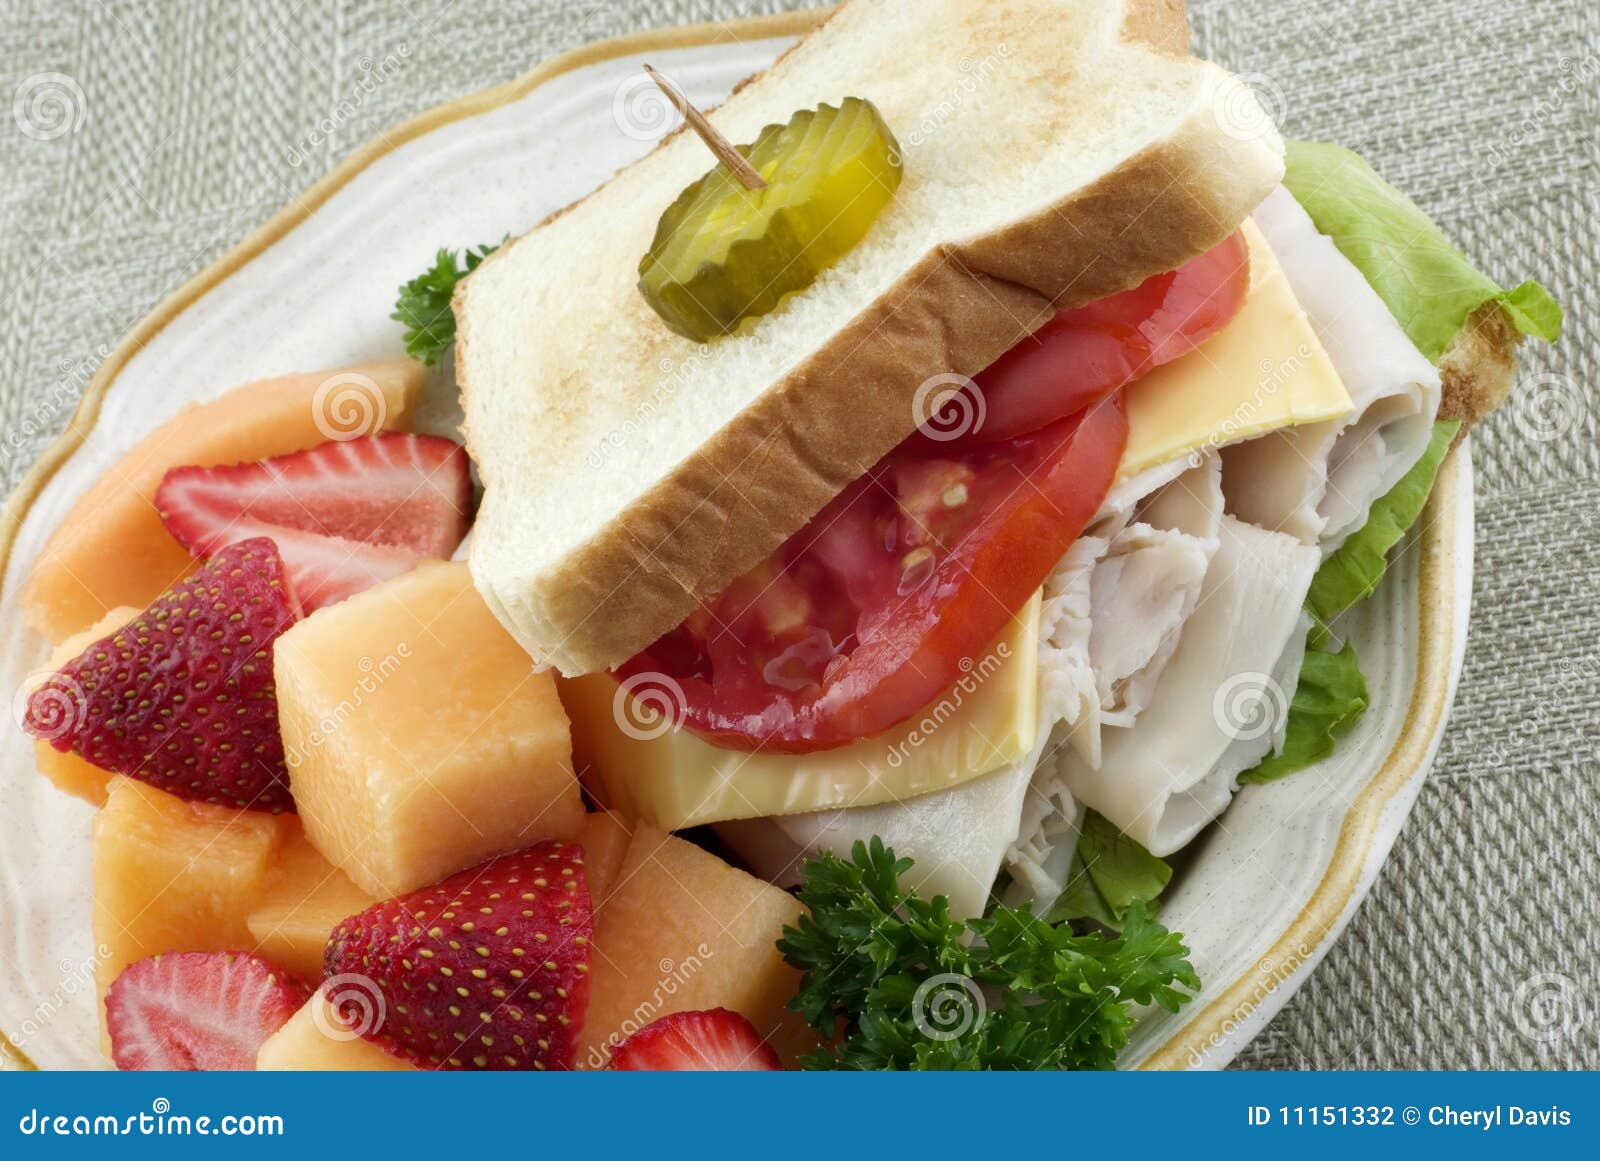 Turkey Sandwich and Fruit Plate Stock Photo - Image of diagonal, frame